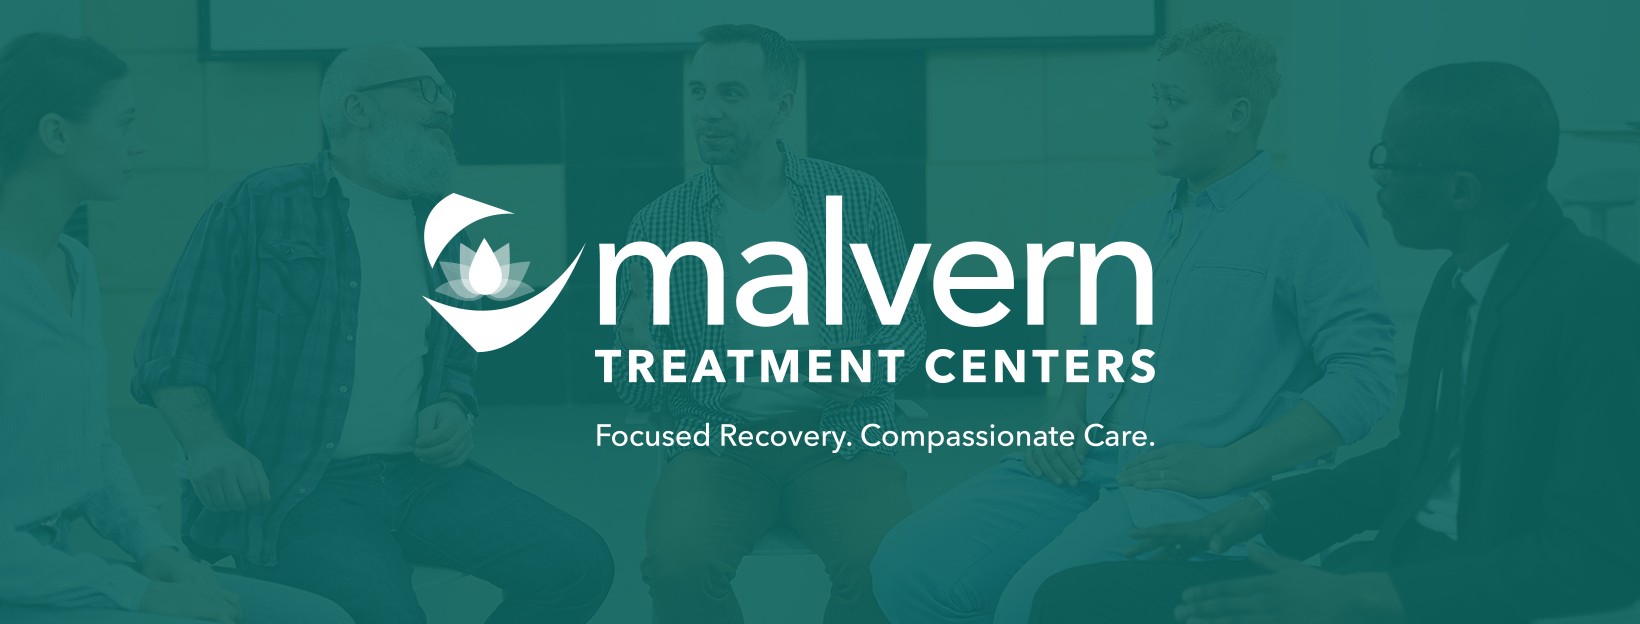 Malvern Treatment Centers on LinkedIn: #recoveryispossible #recoverymonth